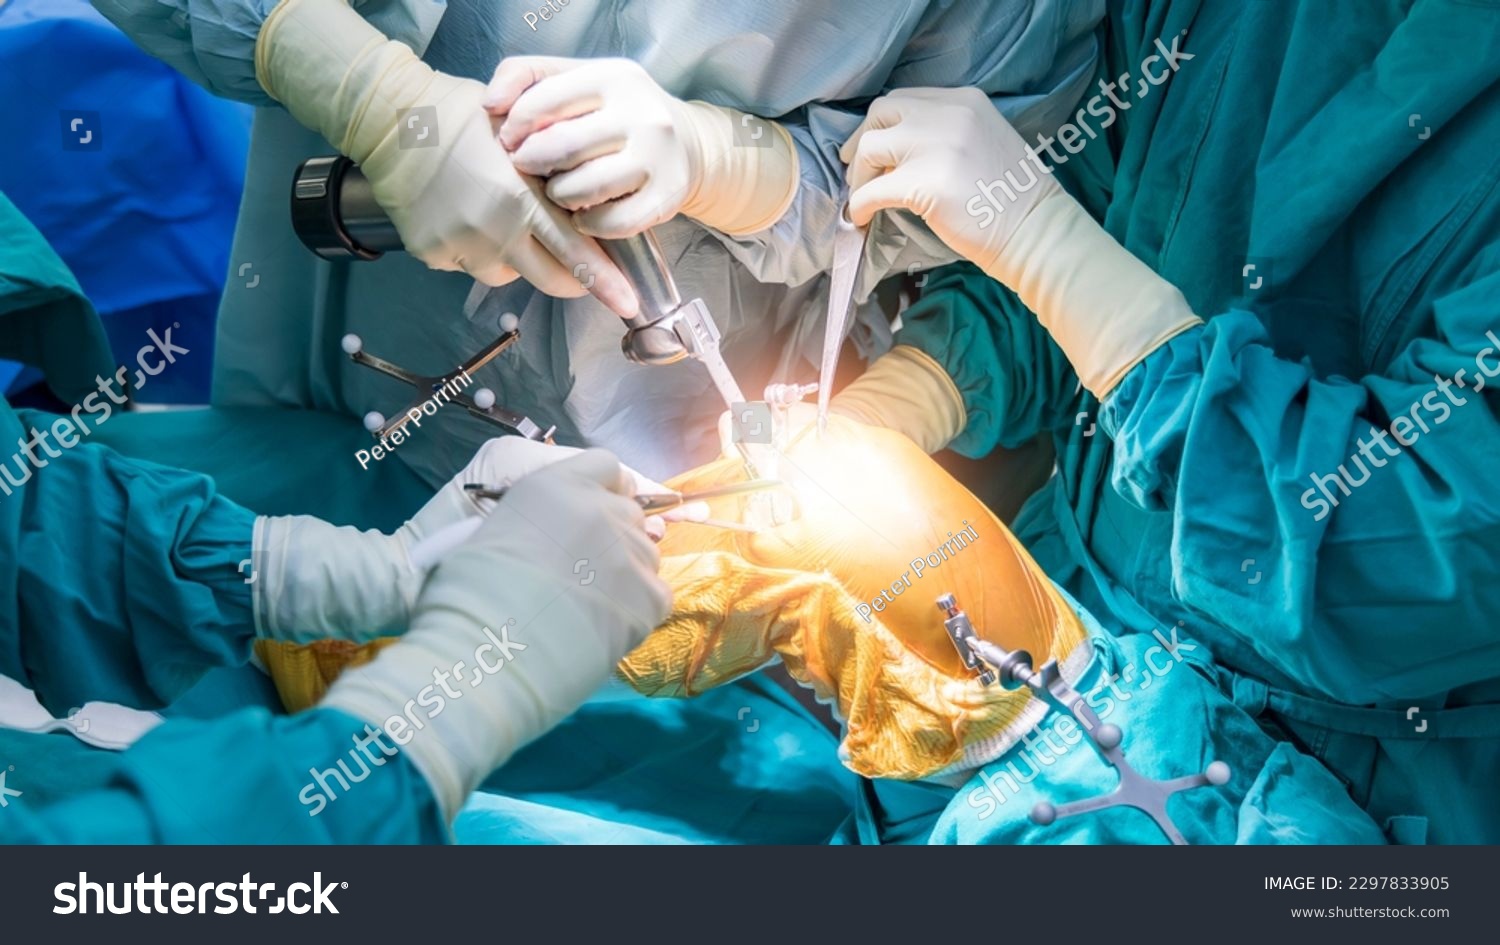 Doctor or surgeon in blue gown used robotic navigator total knee joint arthroplasty surgical instrument inside operating room.Medical technology in orthopedic surgery.Hand of people with a saw. #2297833905